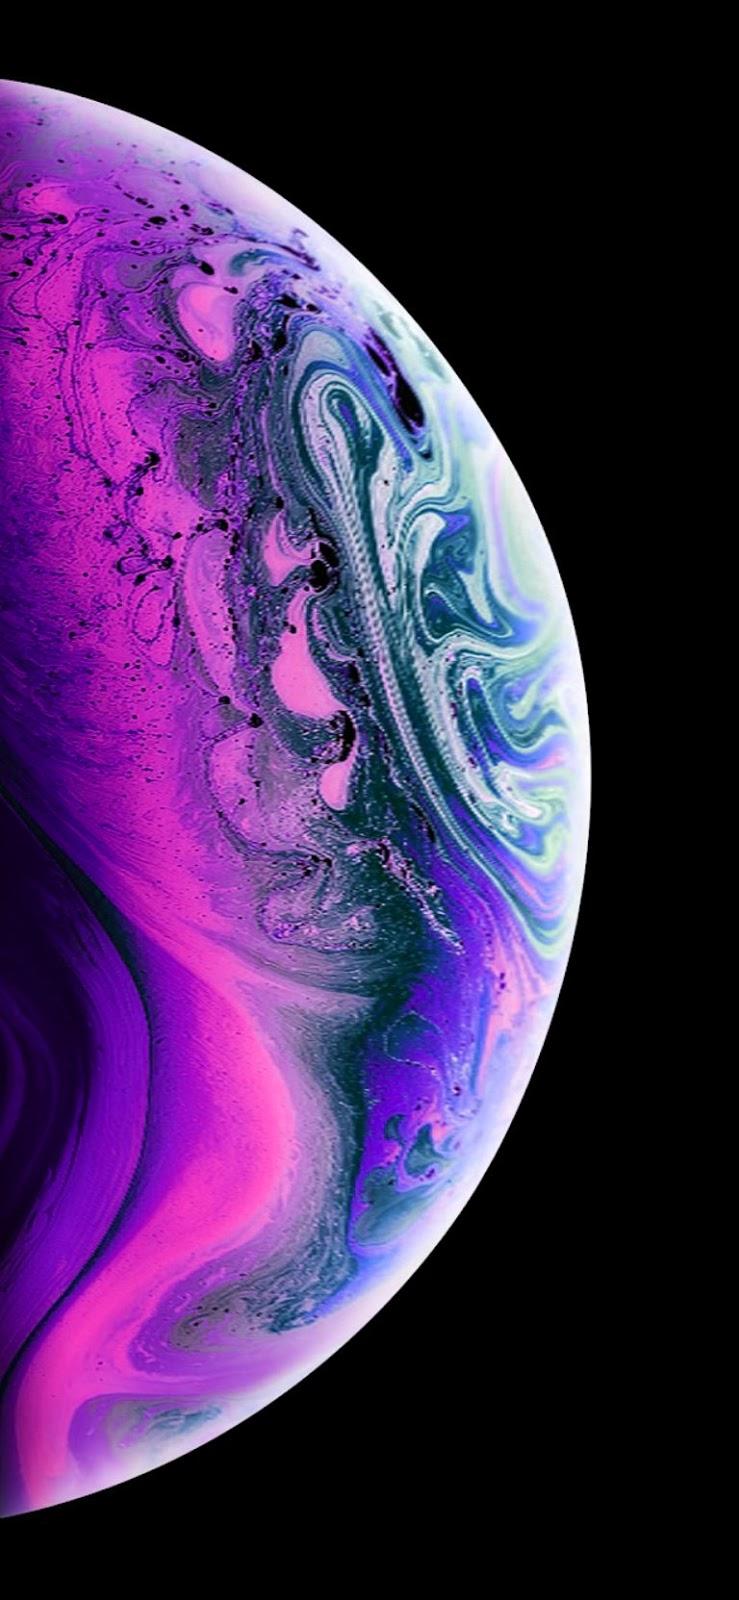 Download iPhone XS Stock Wallpaper in Full HD Official